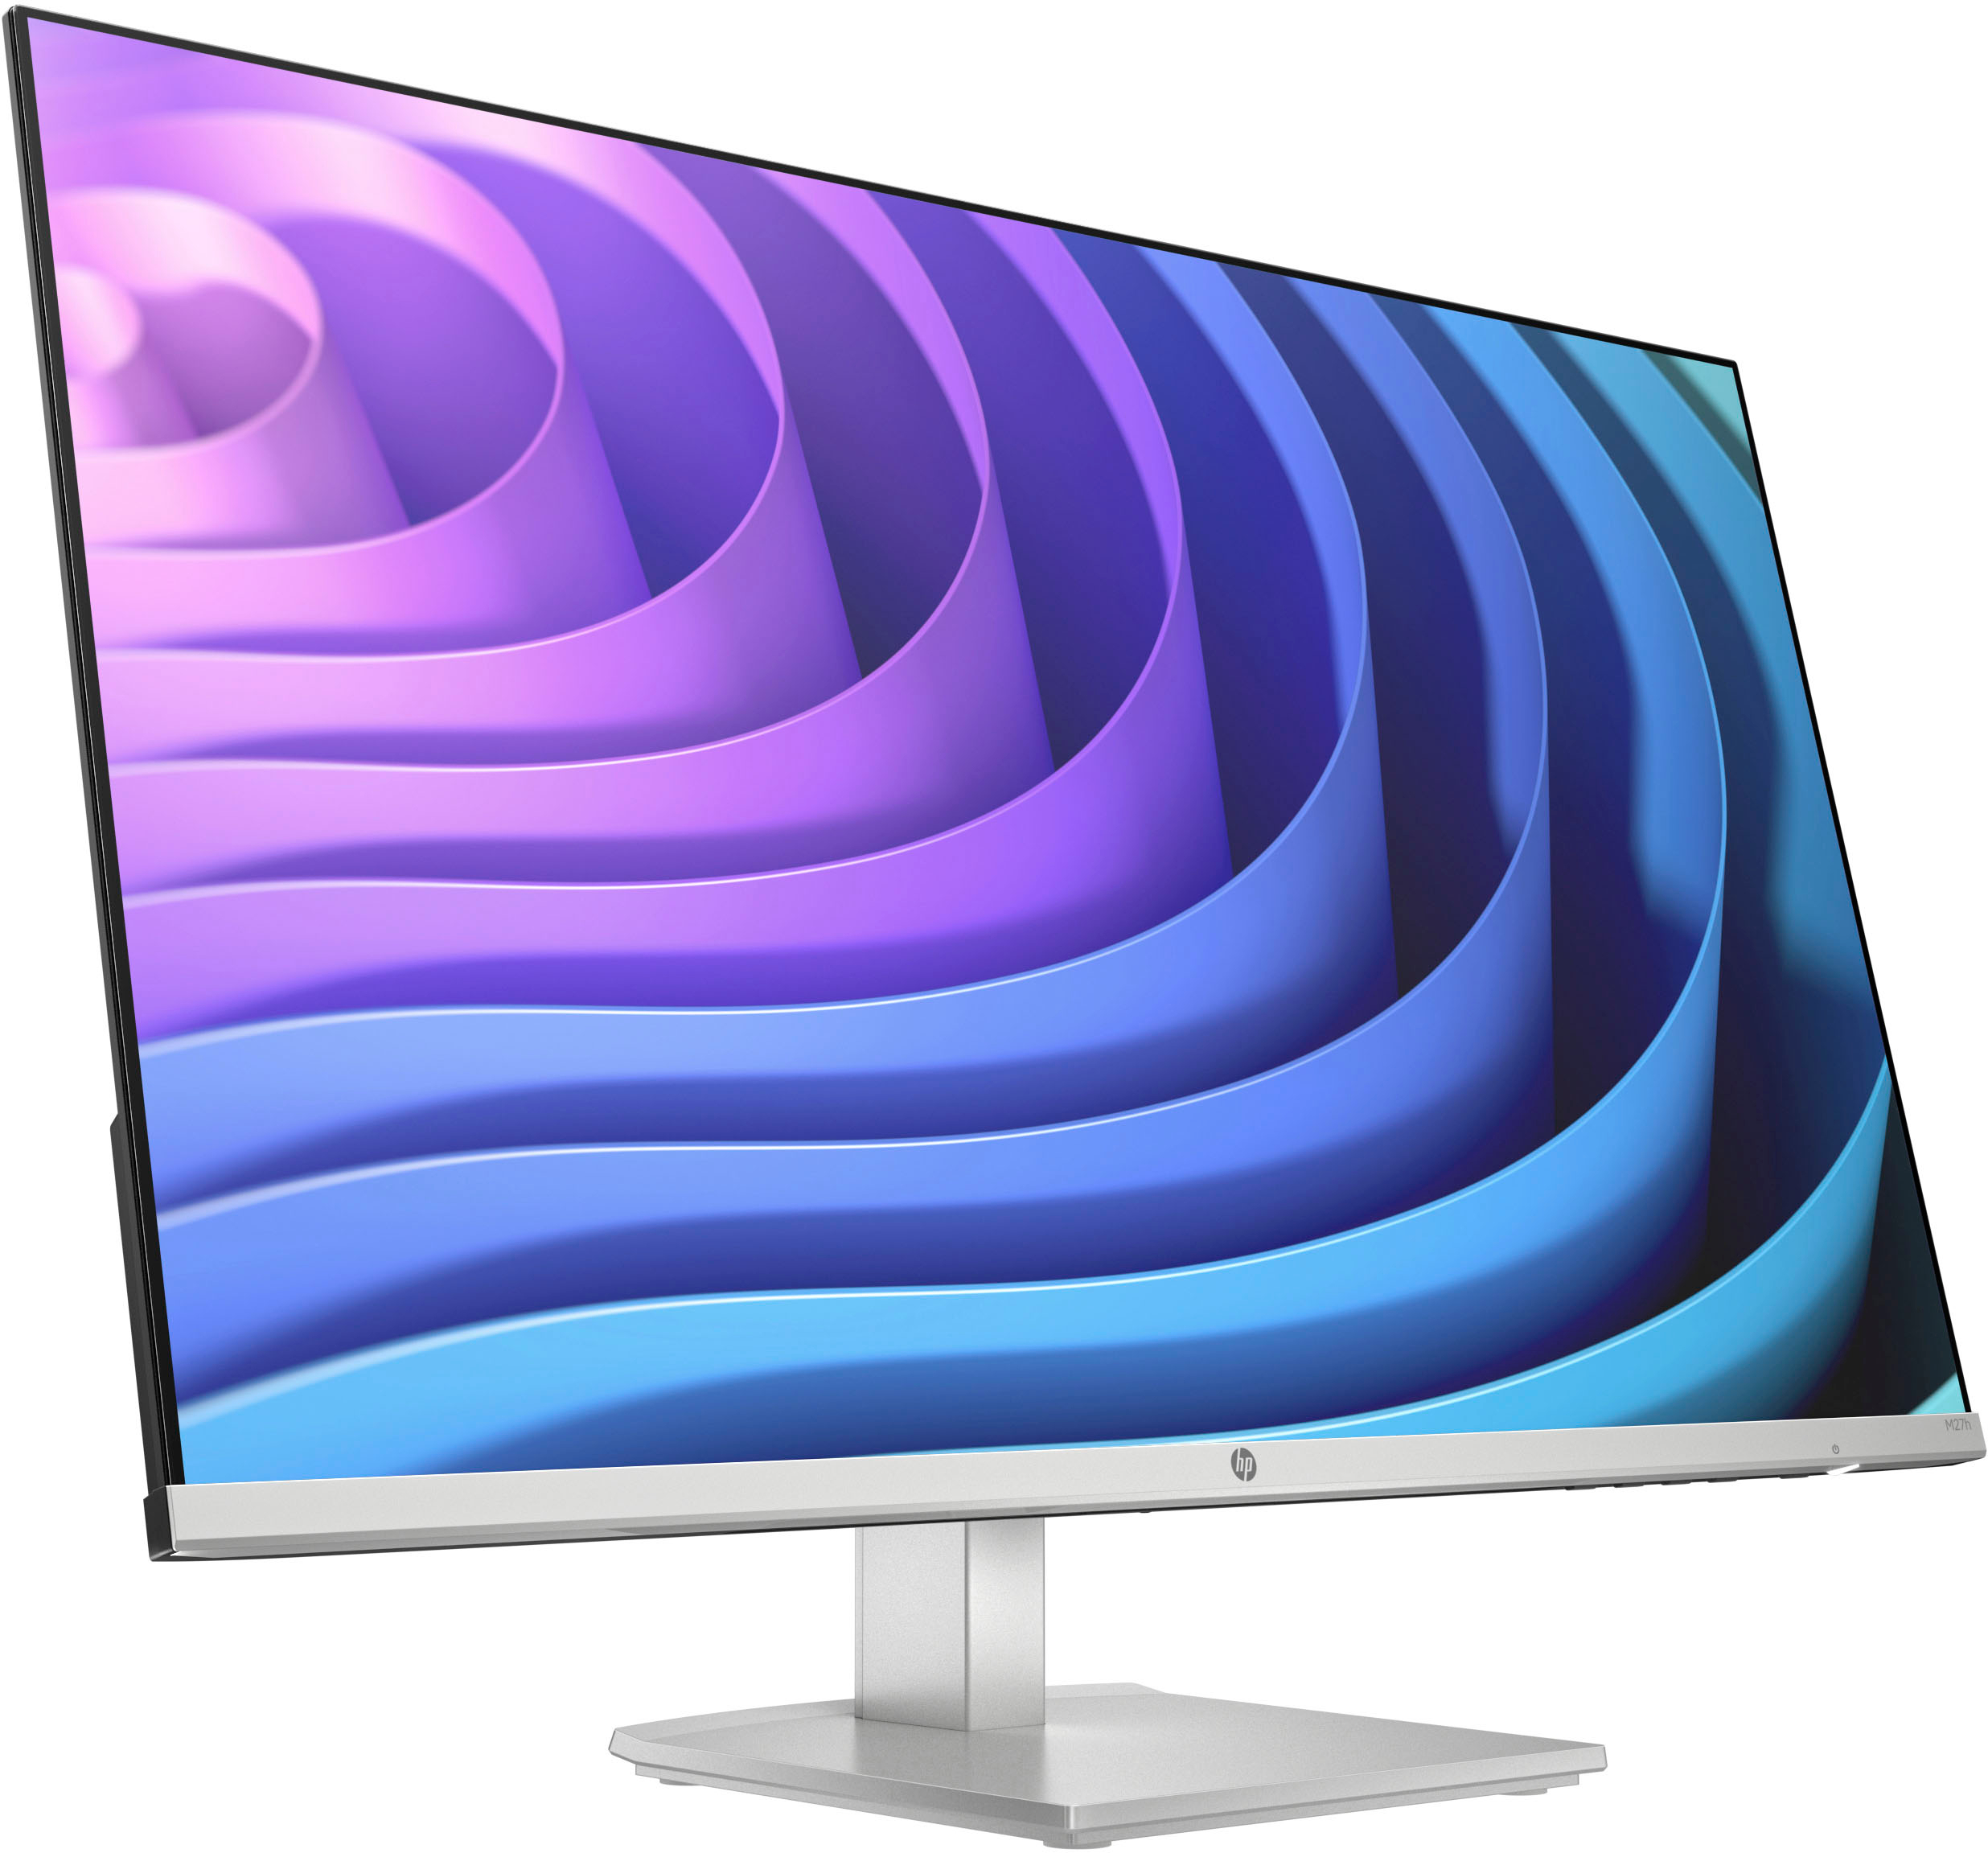 HP IPS LED FHD FreeSync Monitor - Silver & Black - 27 in